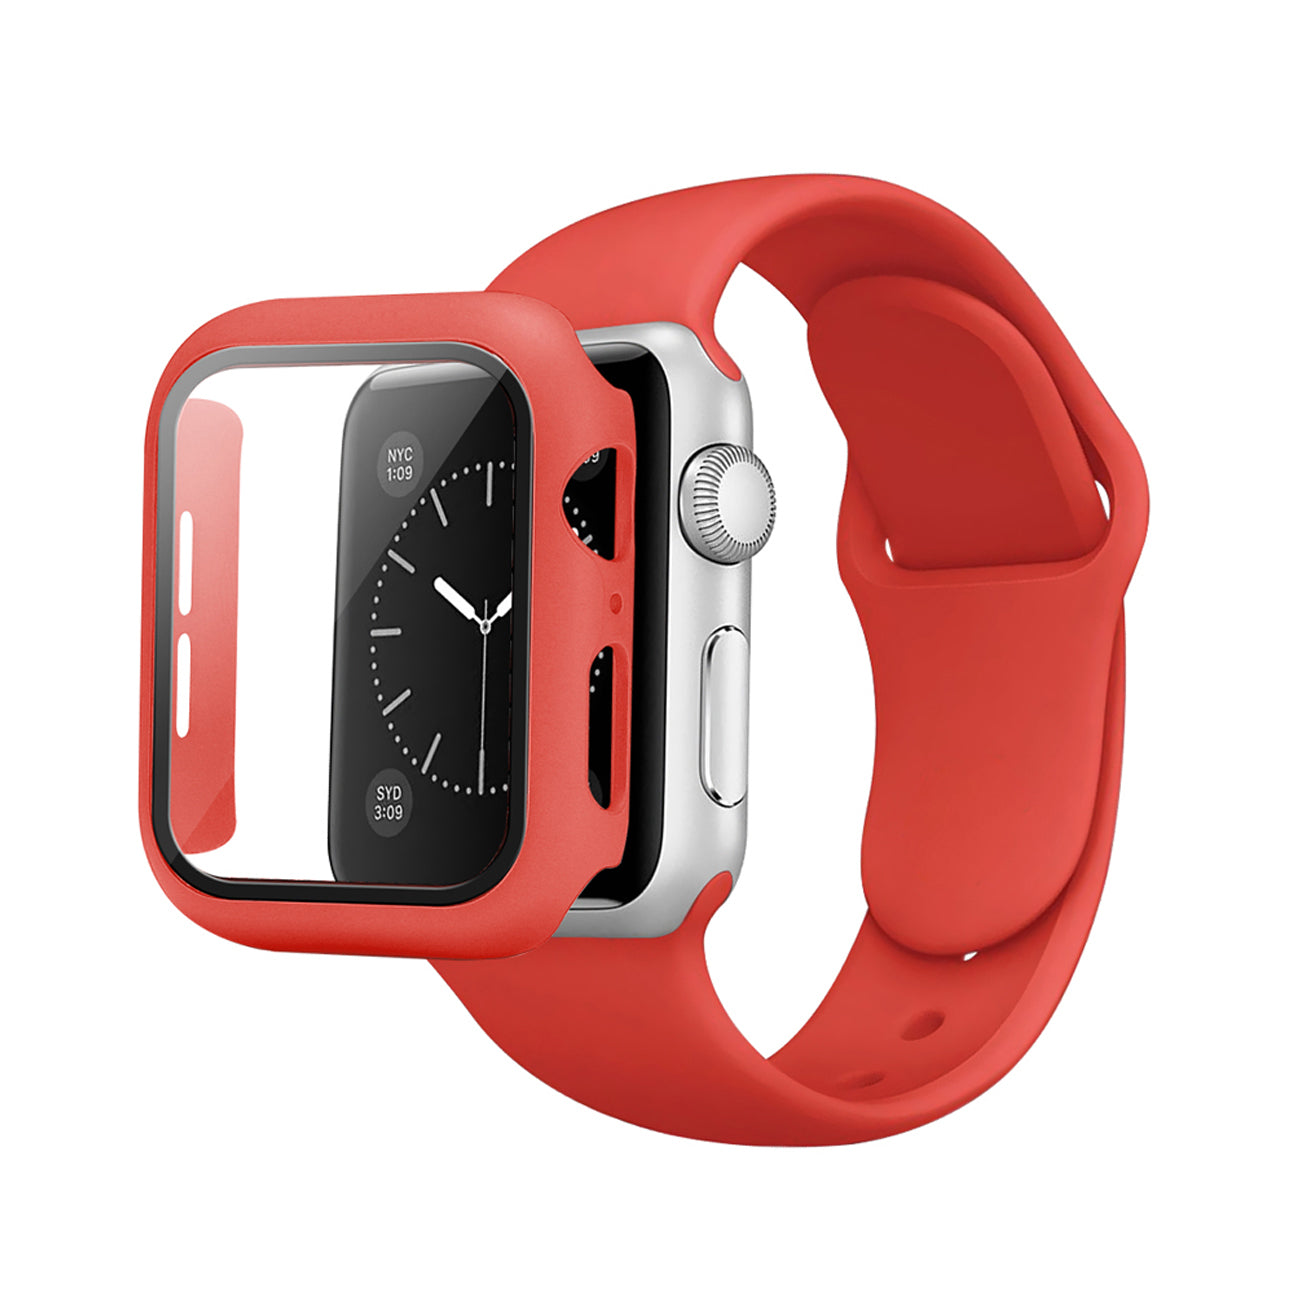 Watch Case PC With Glass Screen Protector, Silicone Watch Band Apple Watch 42mm Red Color